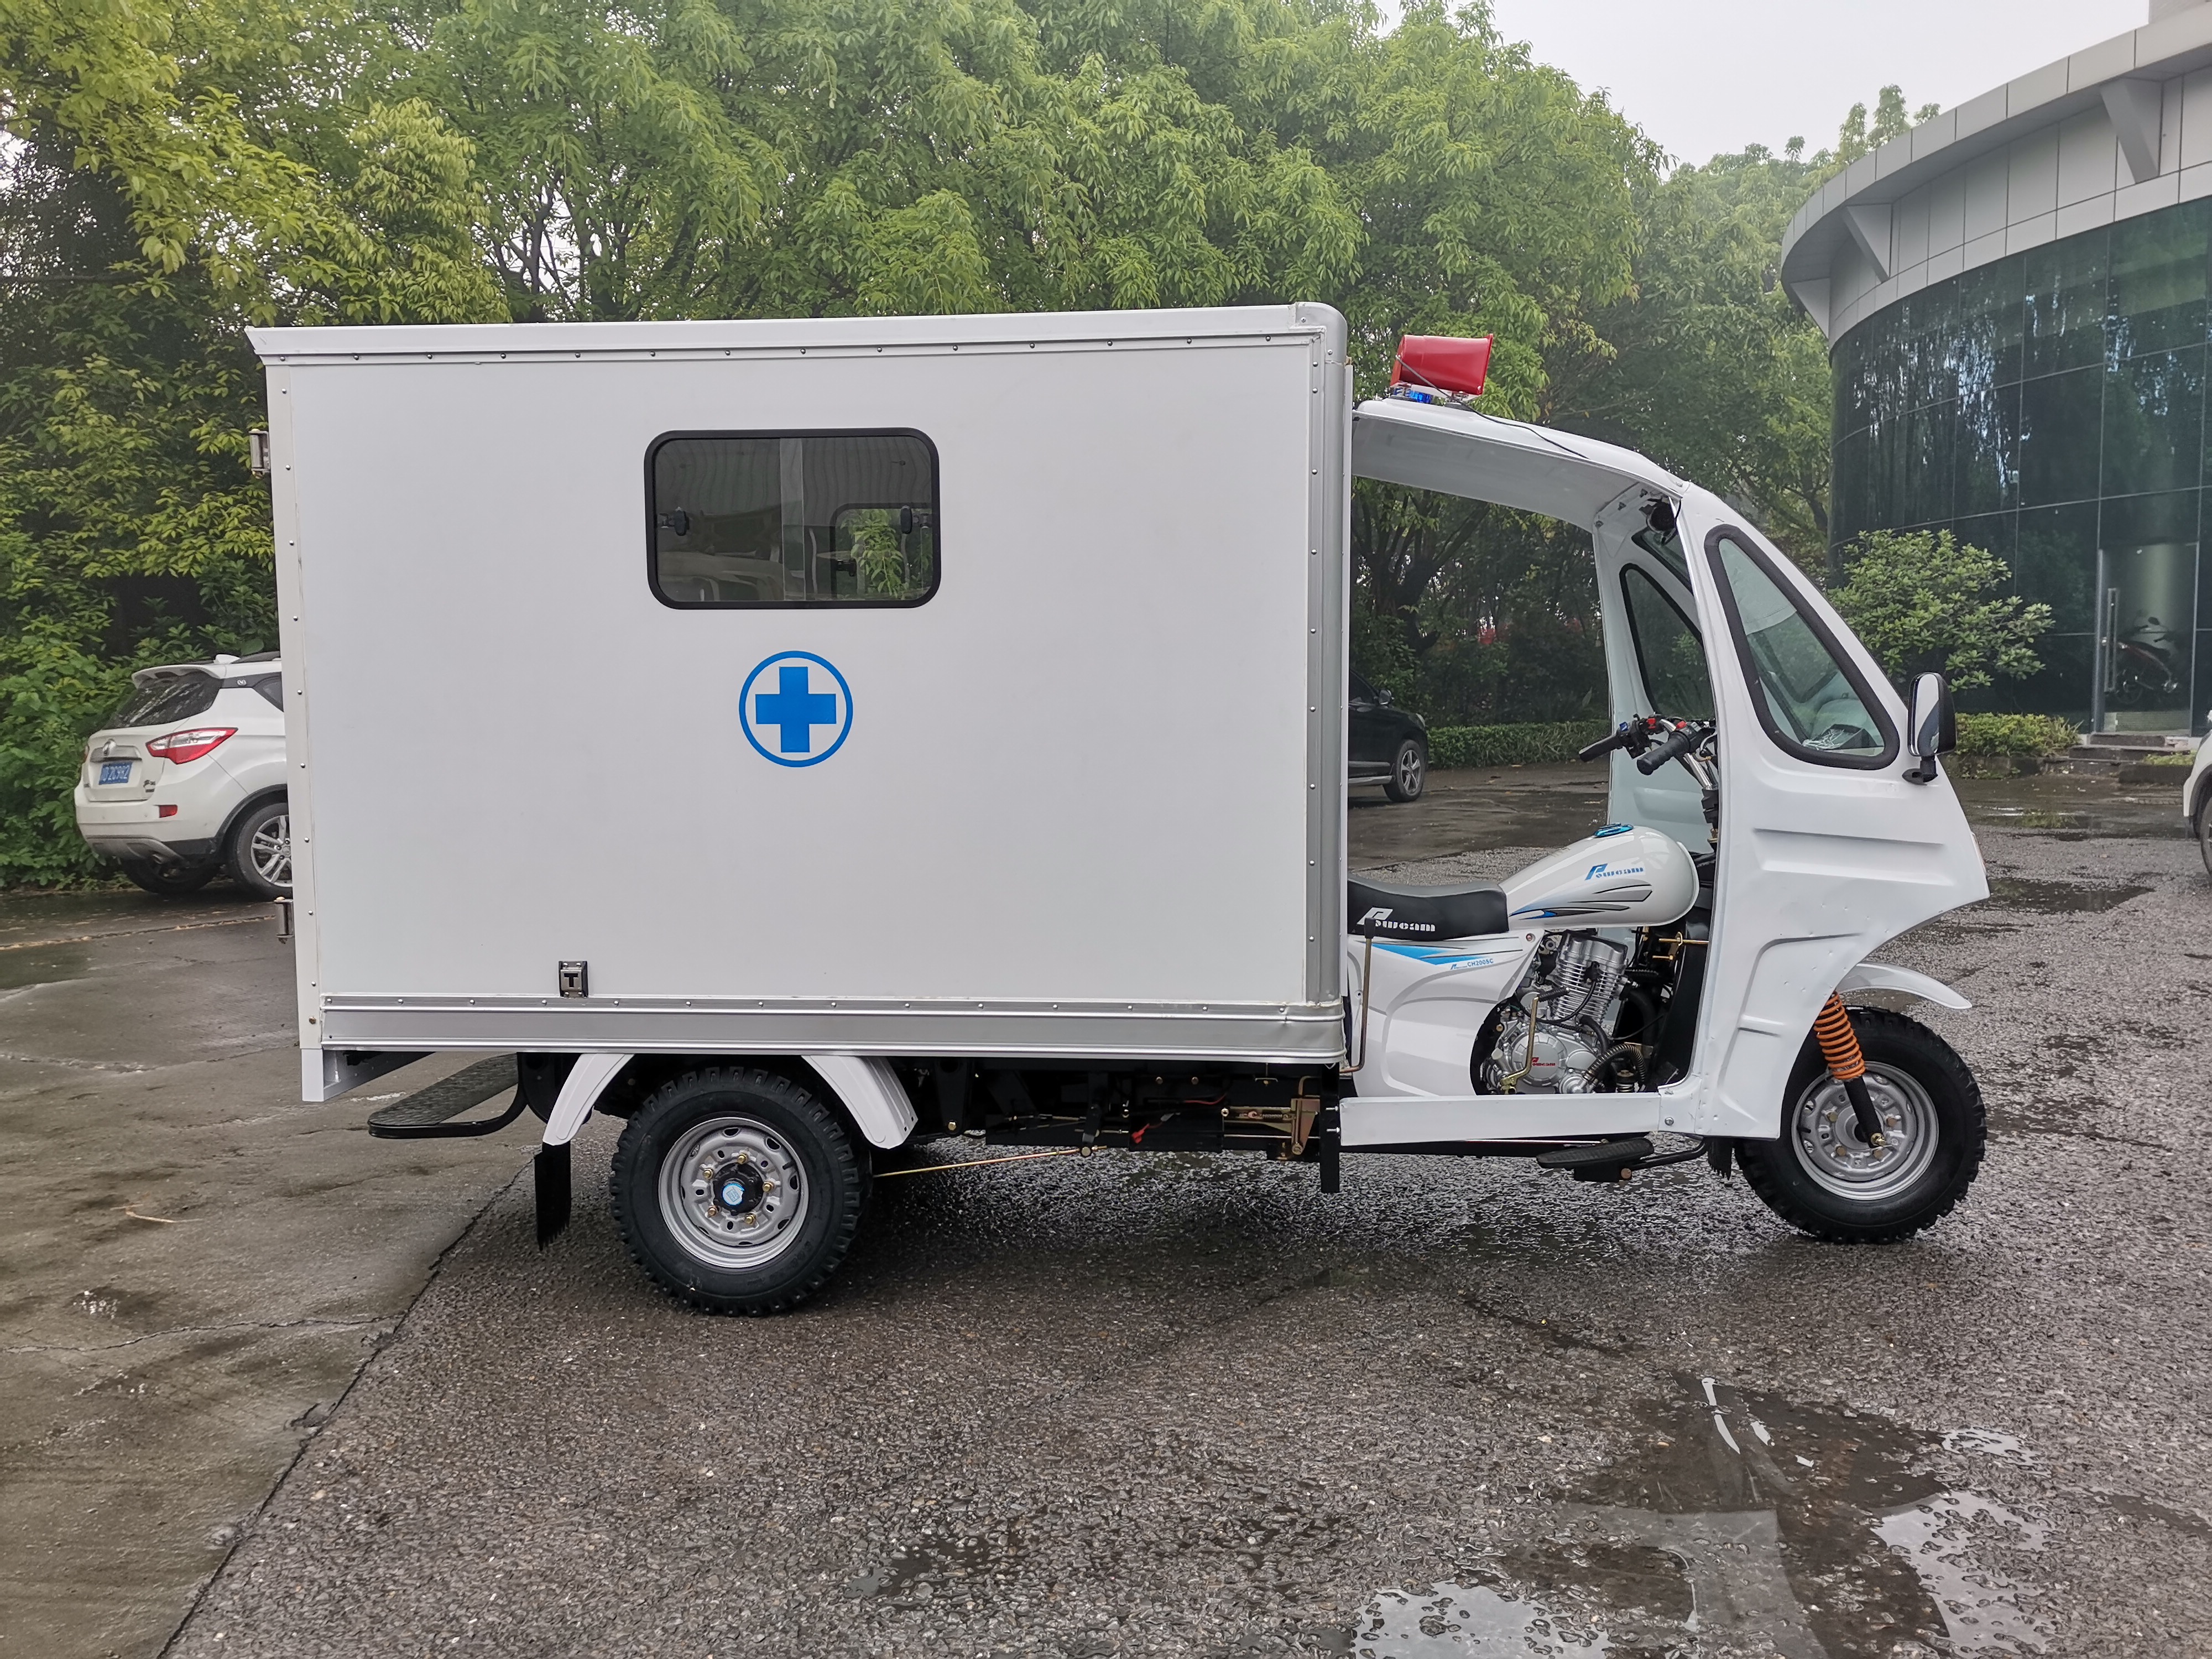 Motorcycle Ambulance for Sale